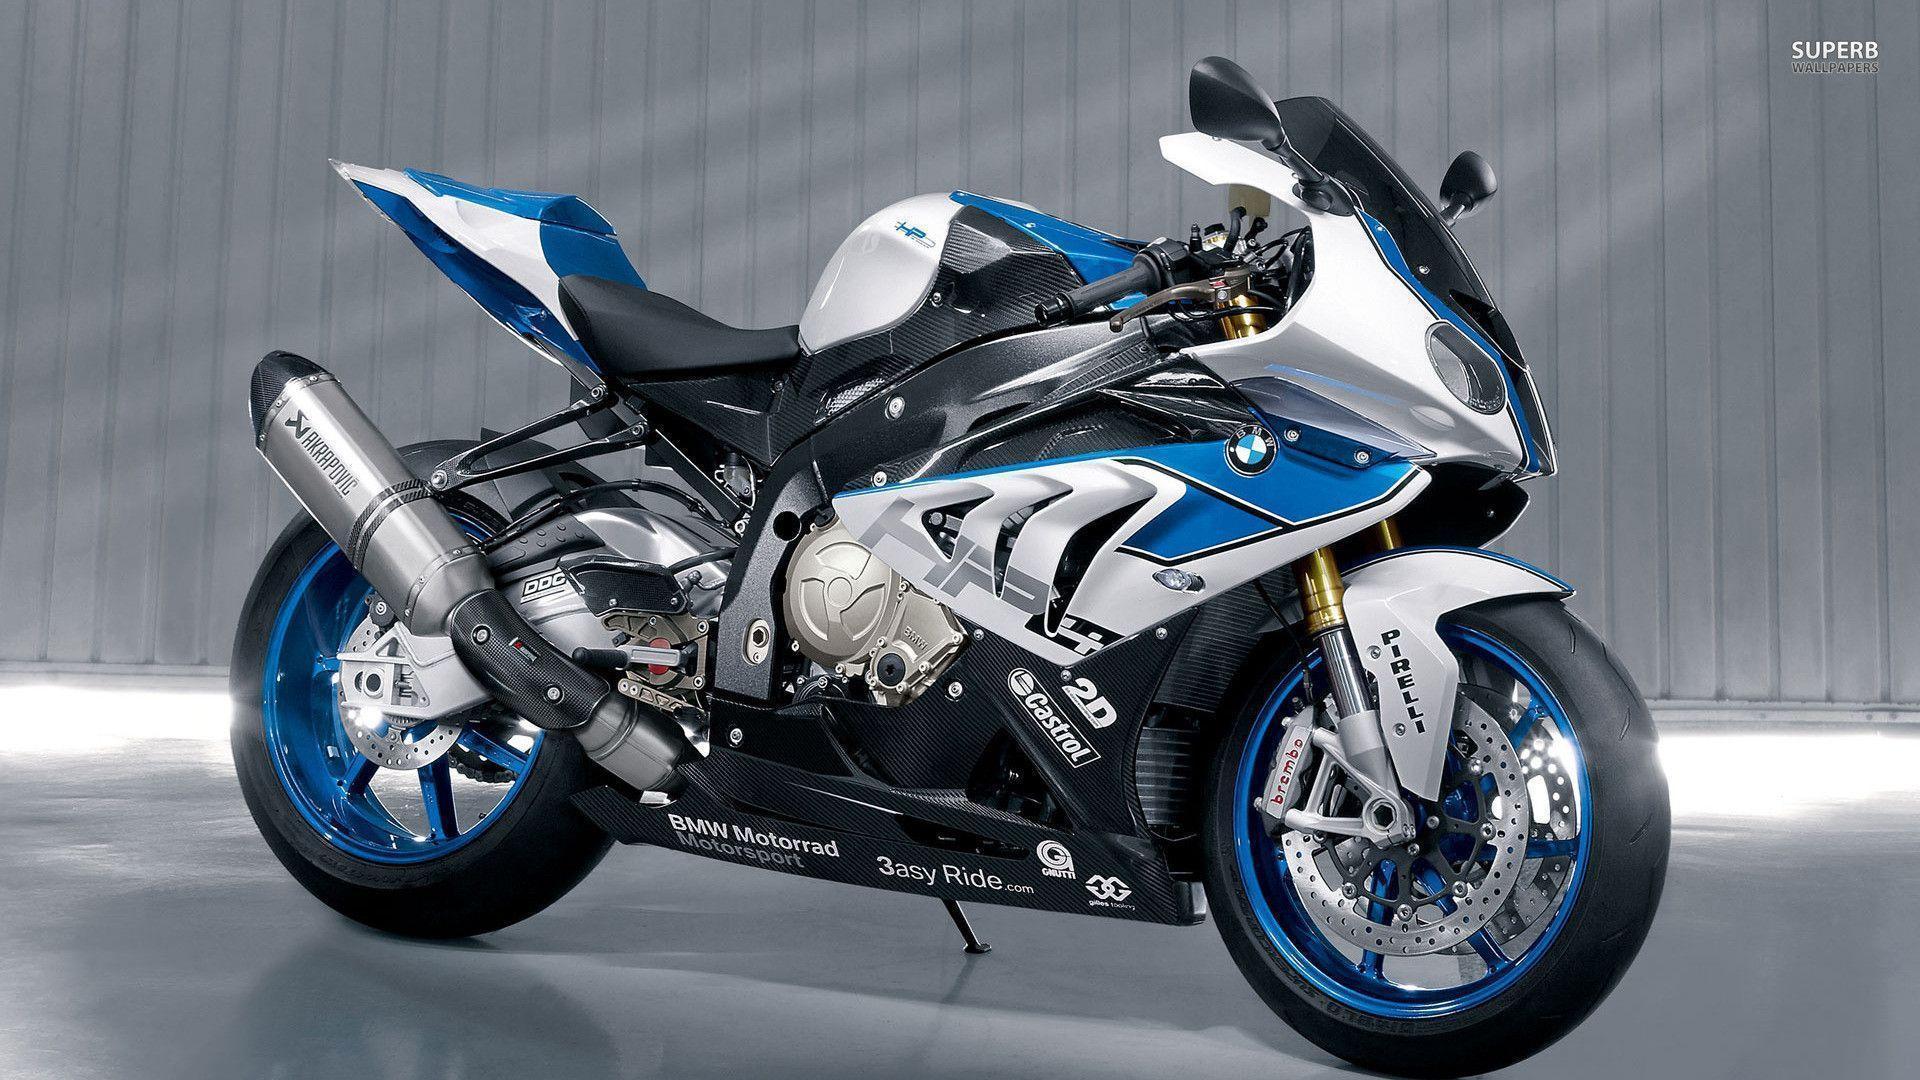 BMW Best Motorcycle Image, Image & Picture. Download HD